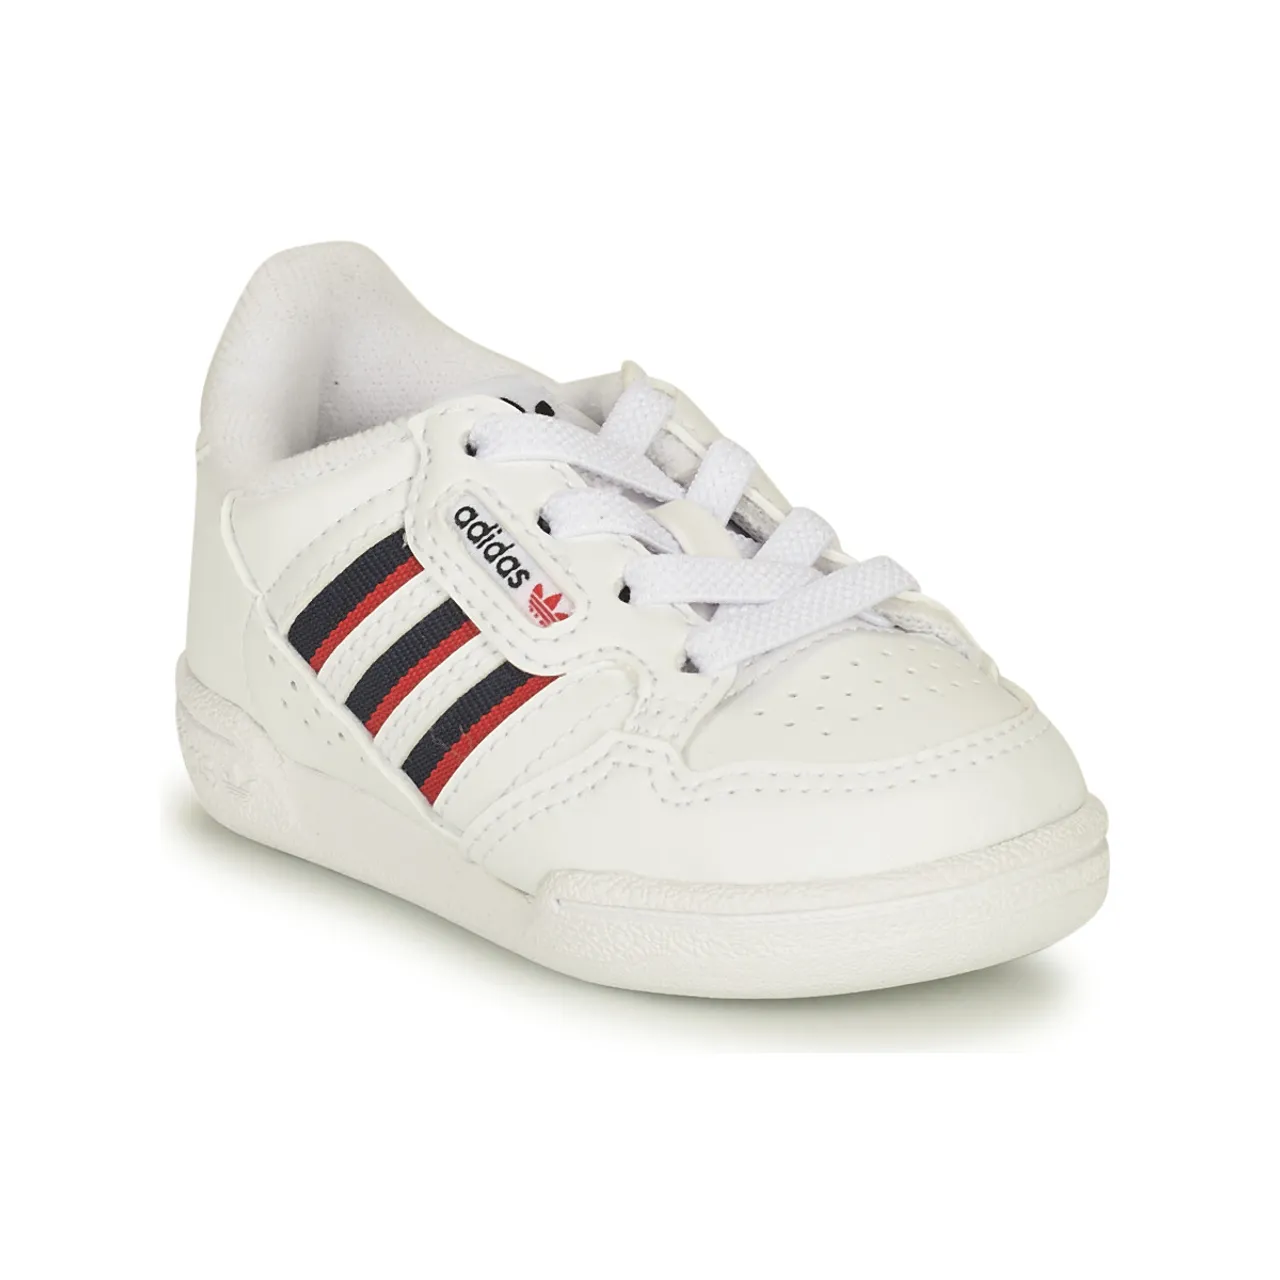 adidas  CONTINENTAL 80 STRI I  boys's Children's Shoes (Trainers) in White